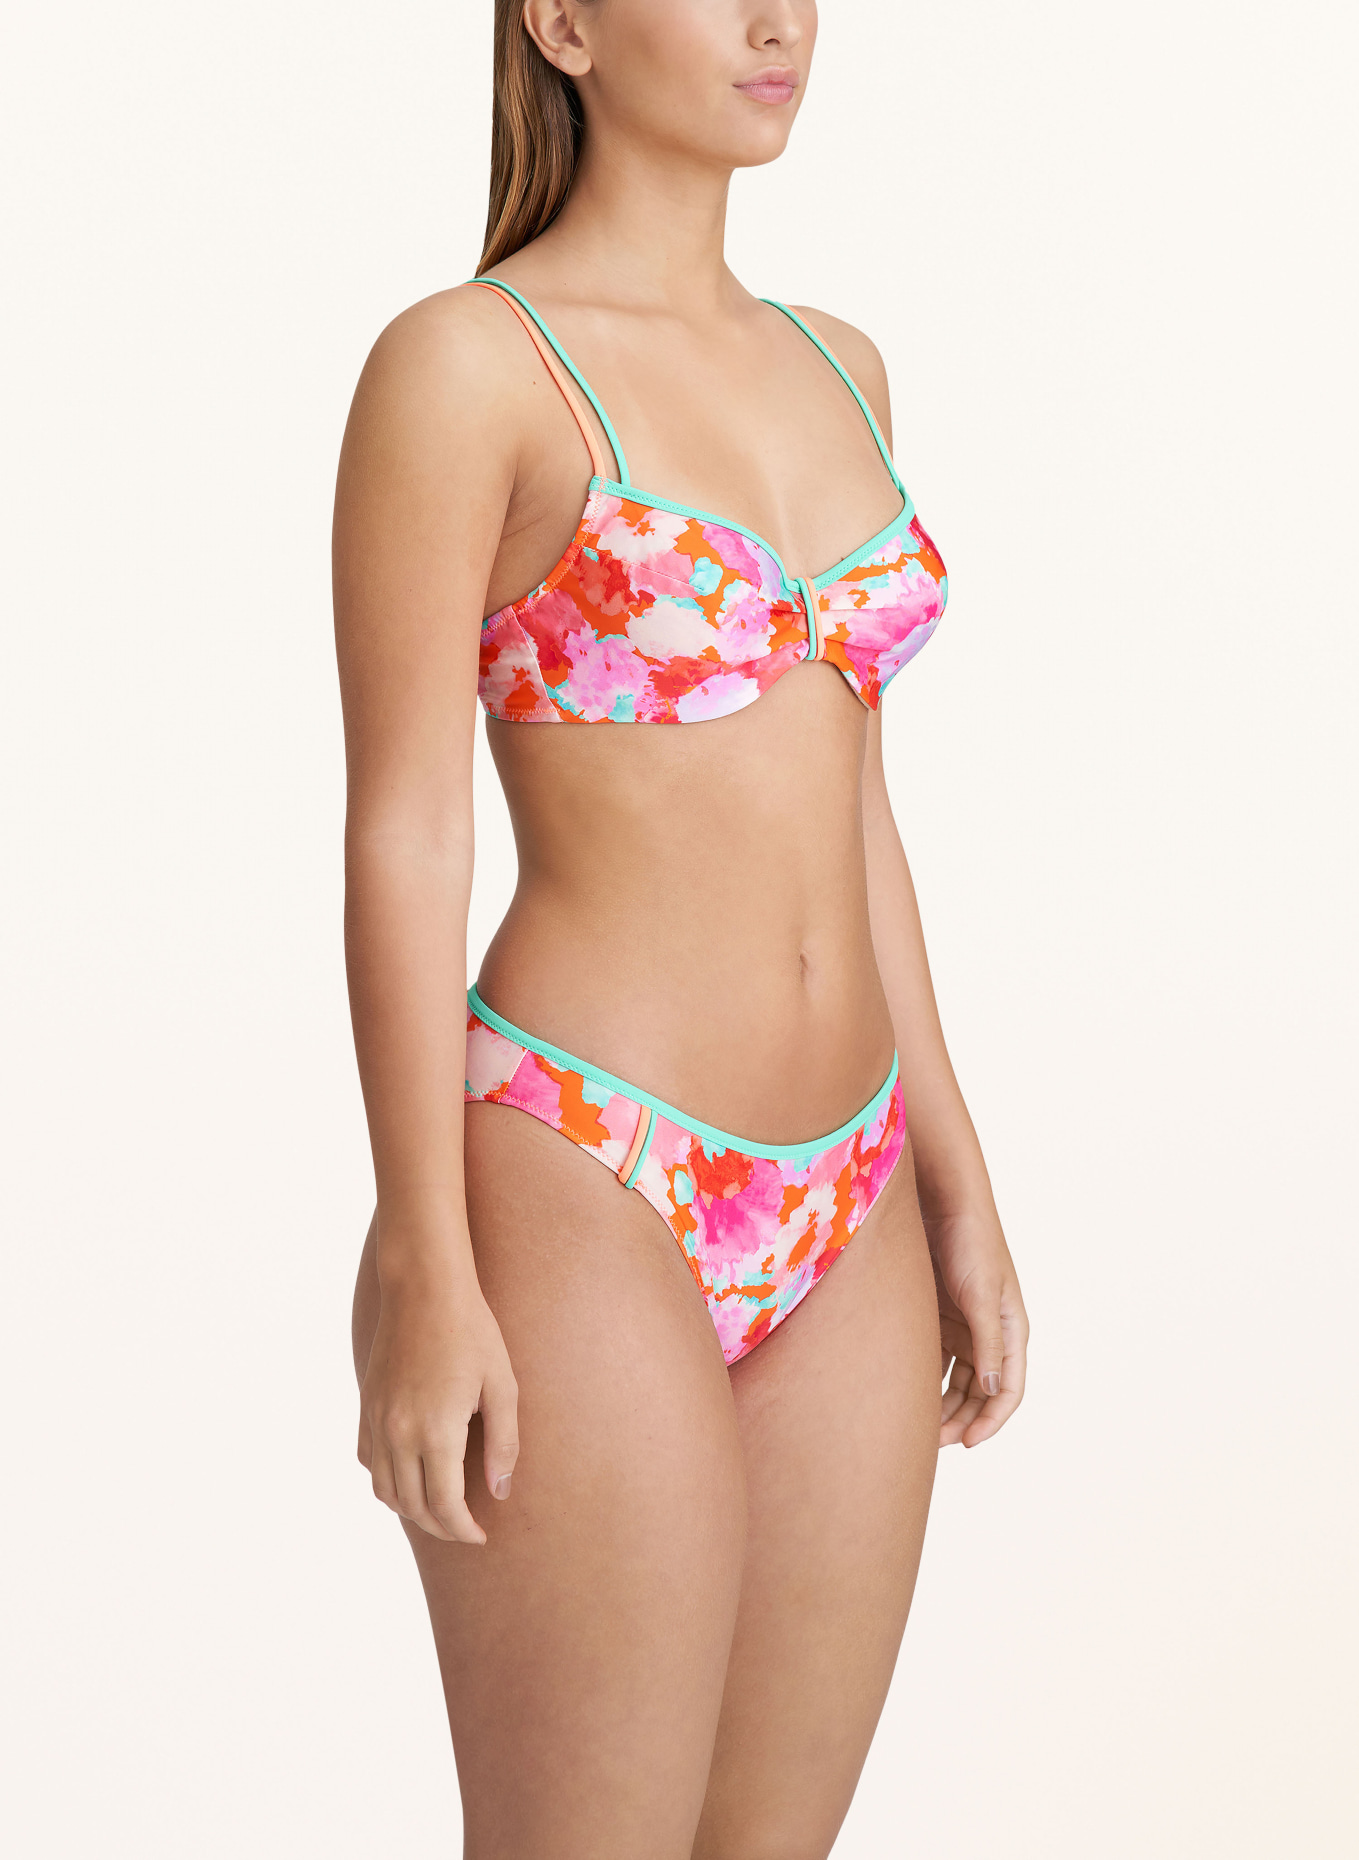 MARIE JO Underwired bikini top APOLLONIS, Color: PINK/ PINK/ MINT (Image 4)